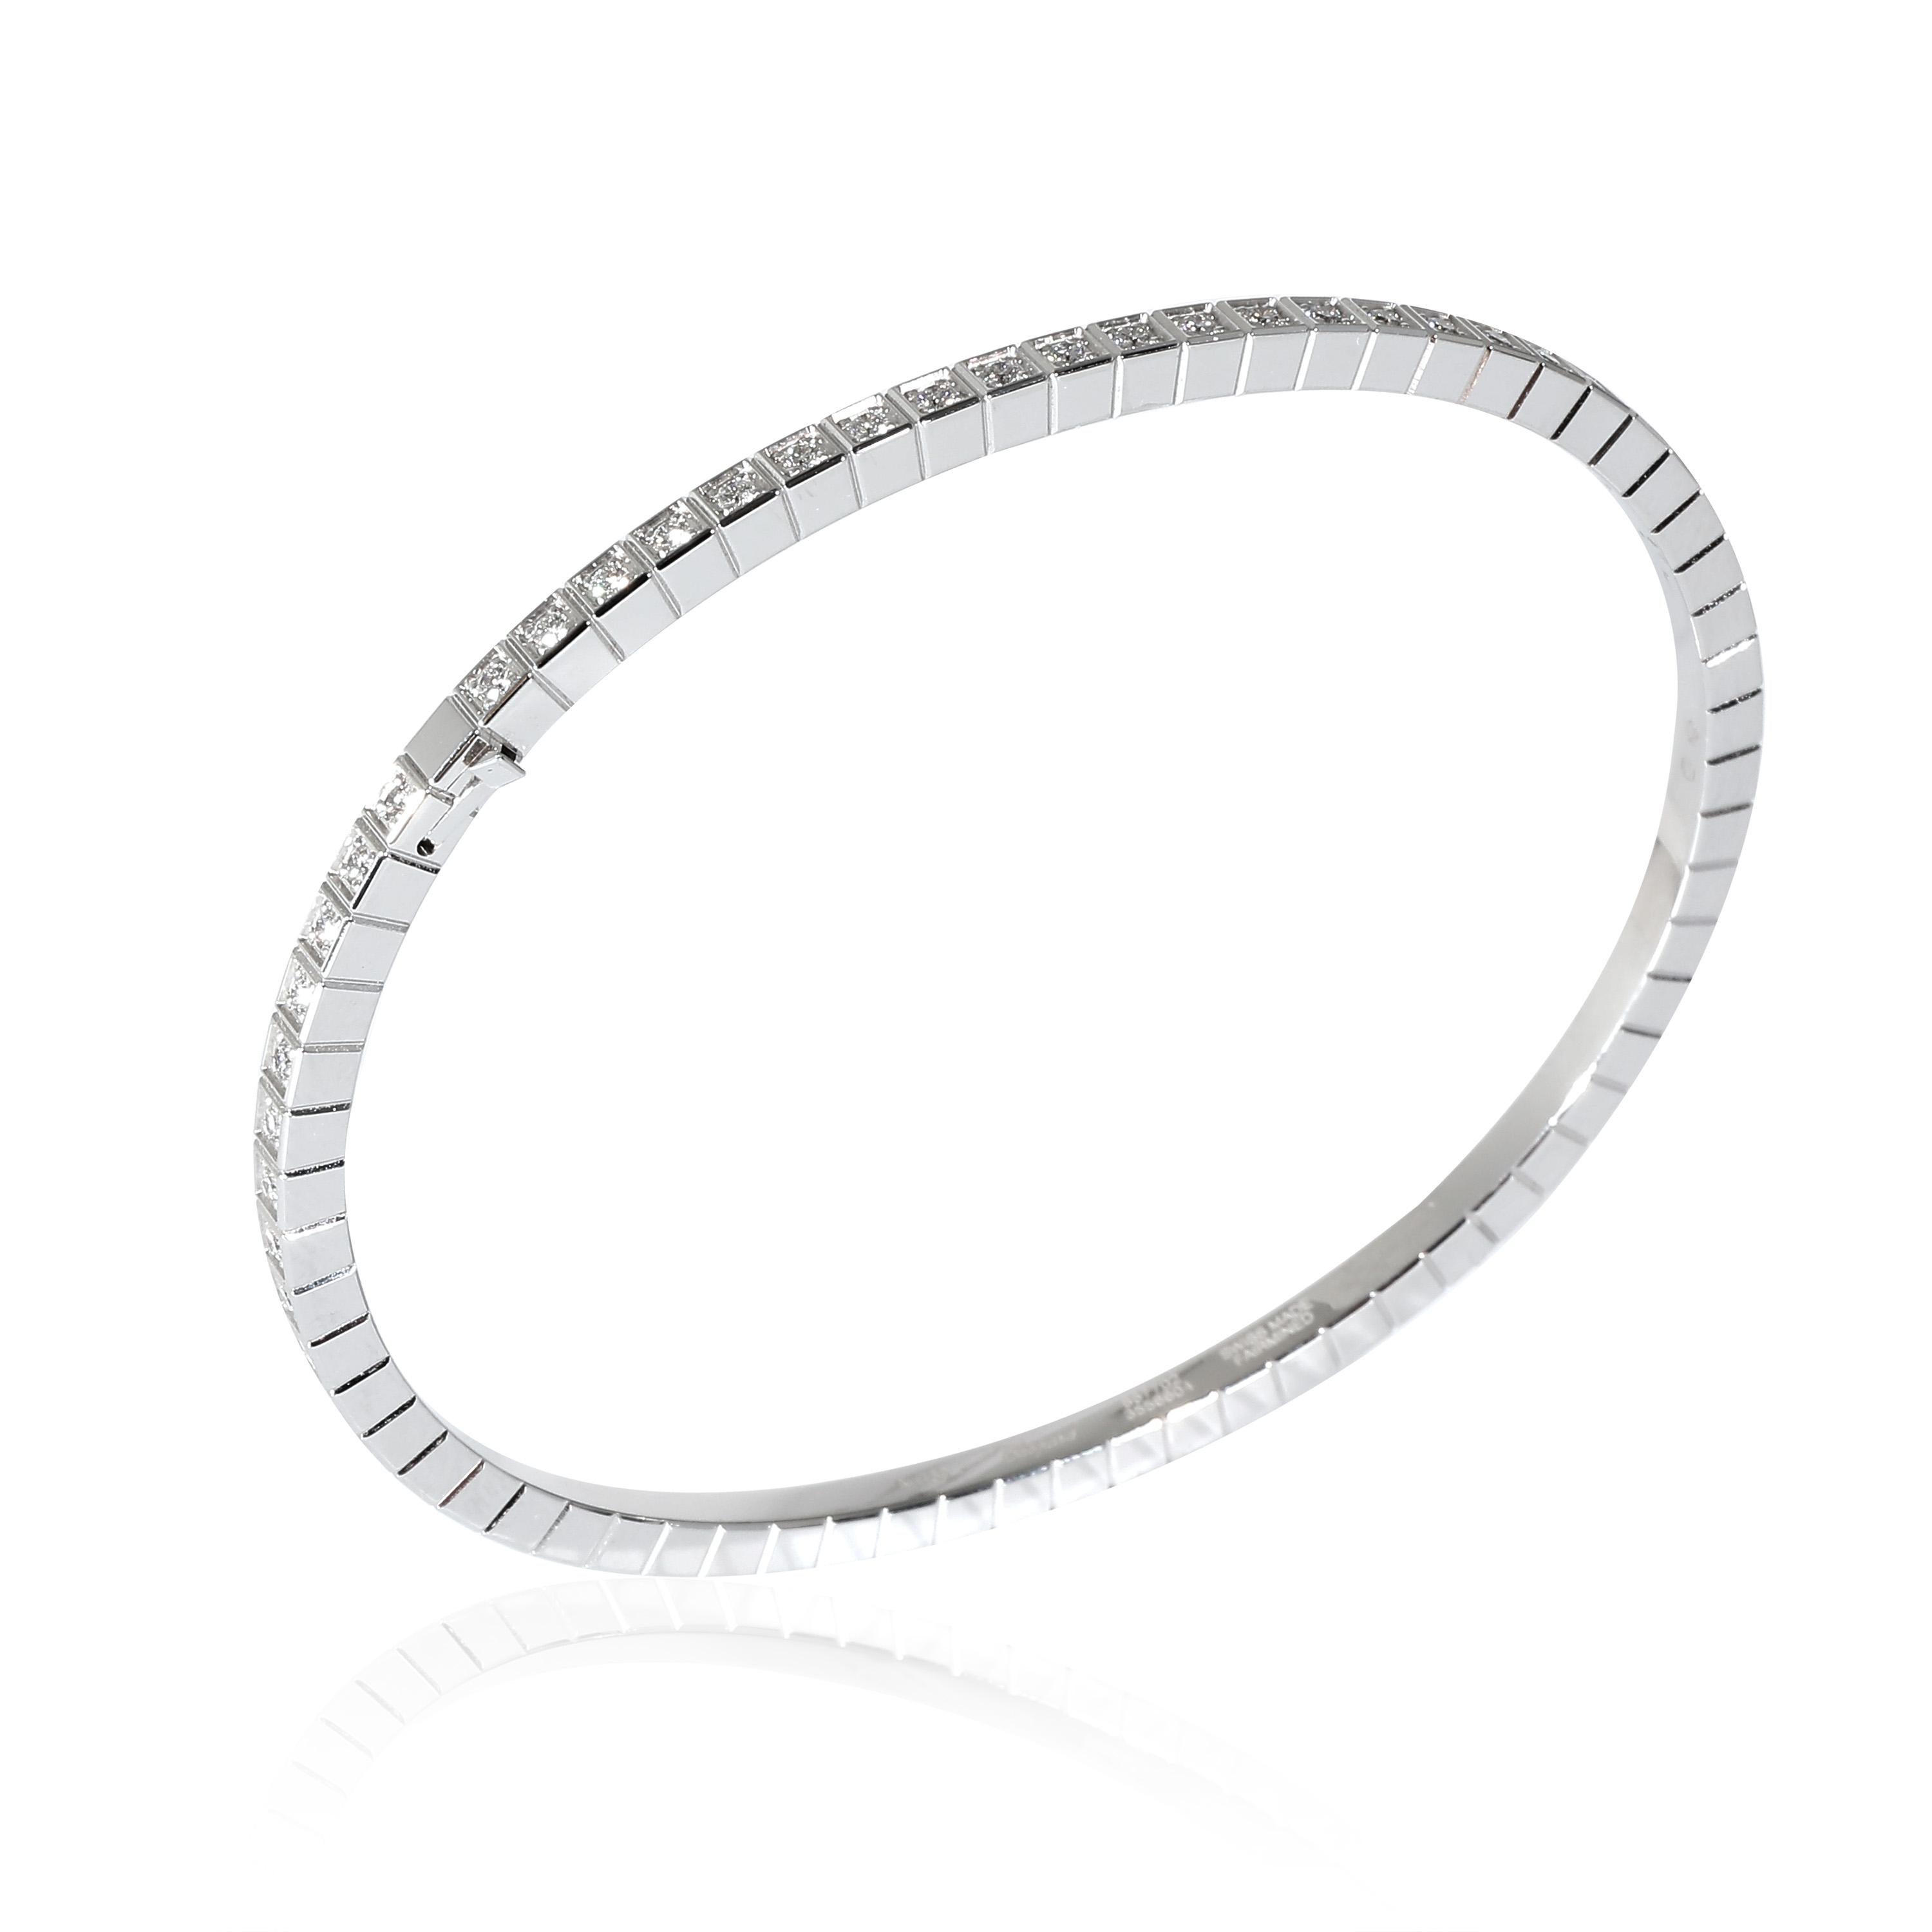 Chopard Ice Cube Eternity Diamond Bracelet in 18k White Gold 0.64 CTW In Excellent Condition For Sale In New York, NY